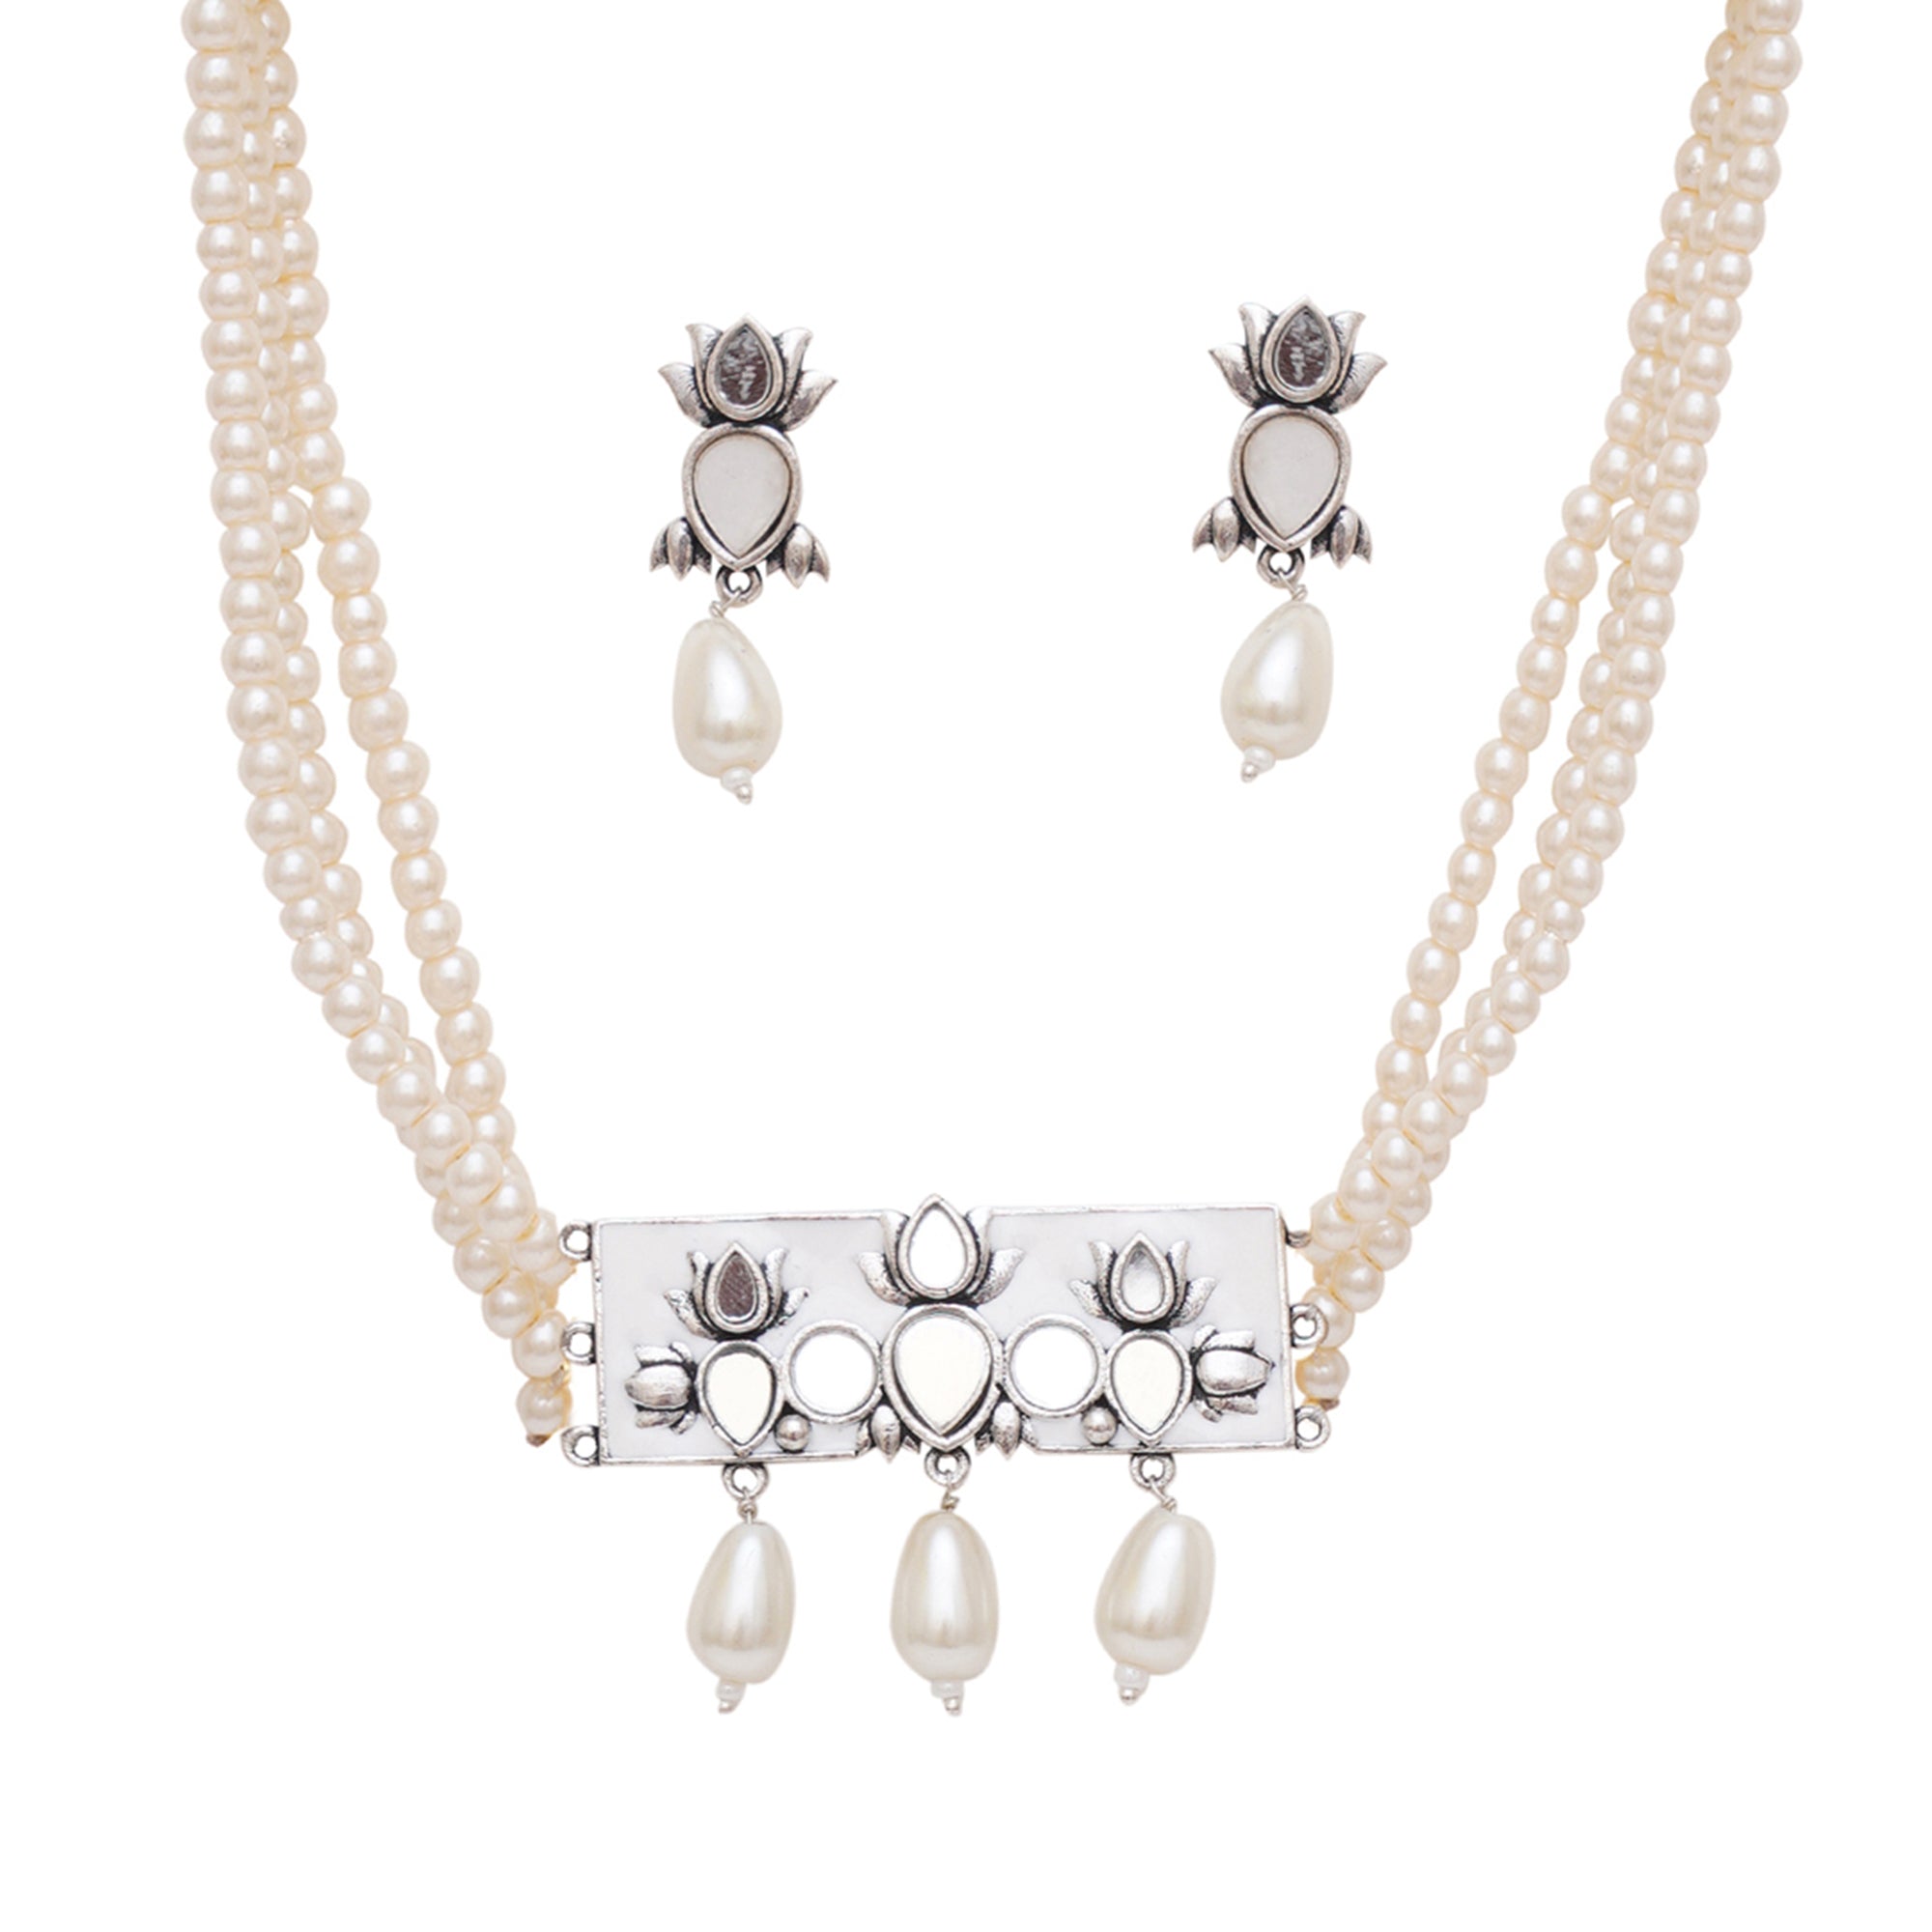 Pearly Queen: Elizabeth II's Signature Three-Stranded Pearl Necklaces